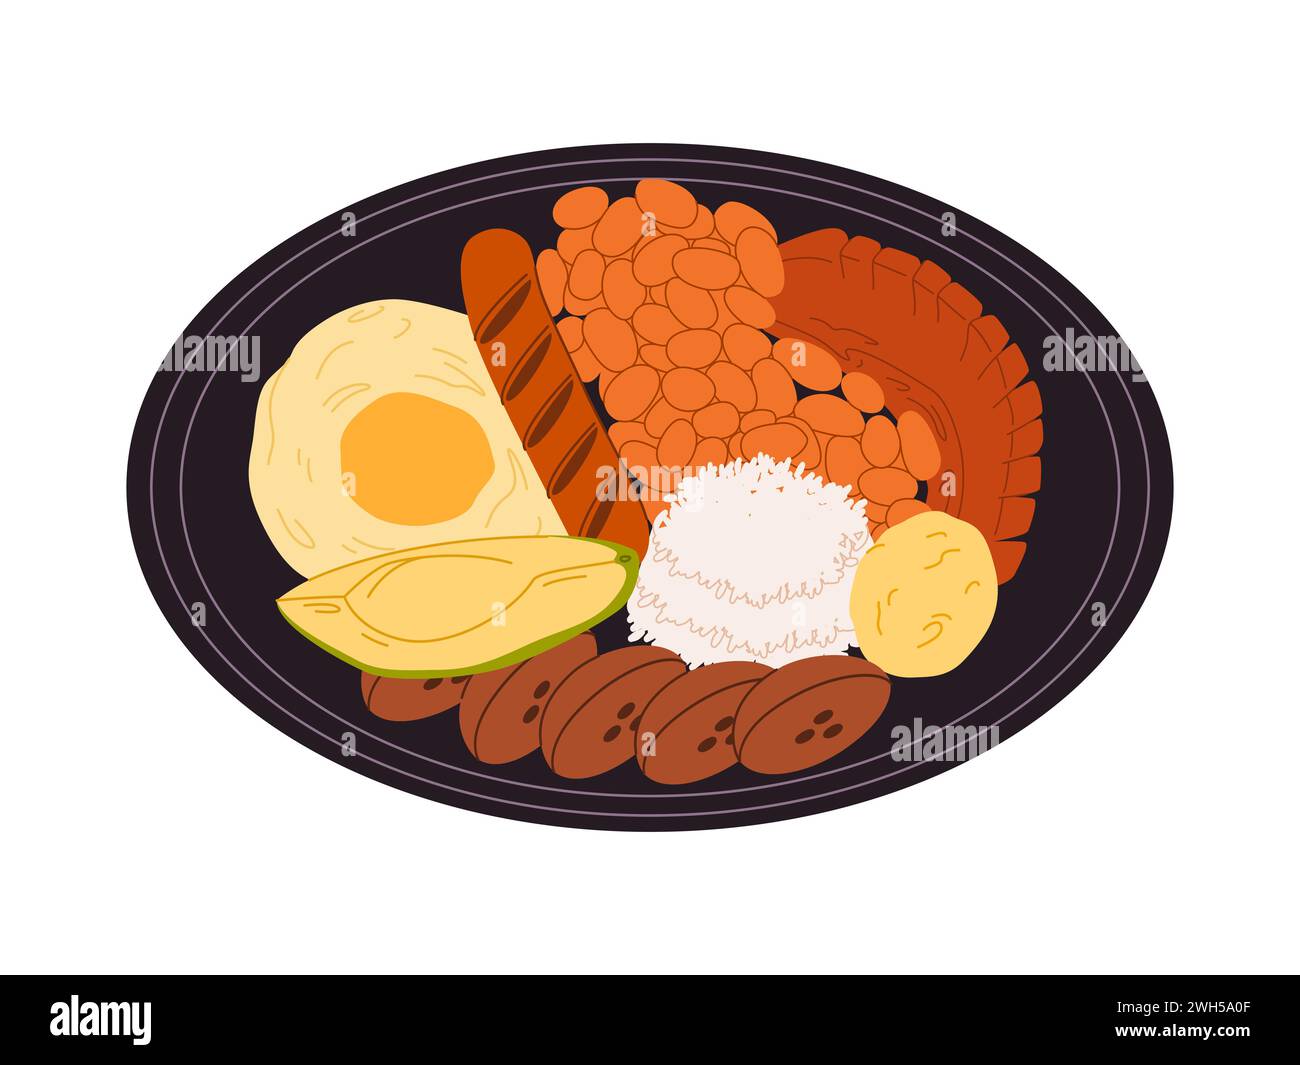 bandeja paisa traditional food colombia made from meat fried egg sausage beans avocado and plantain eaten with rice delicious cuisine Stock Vector